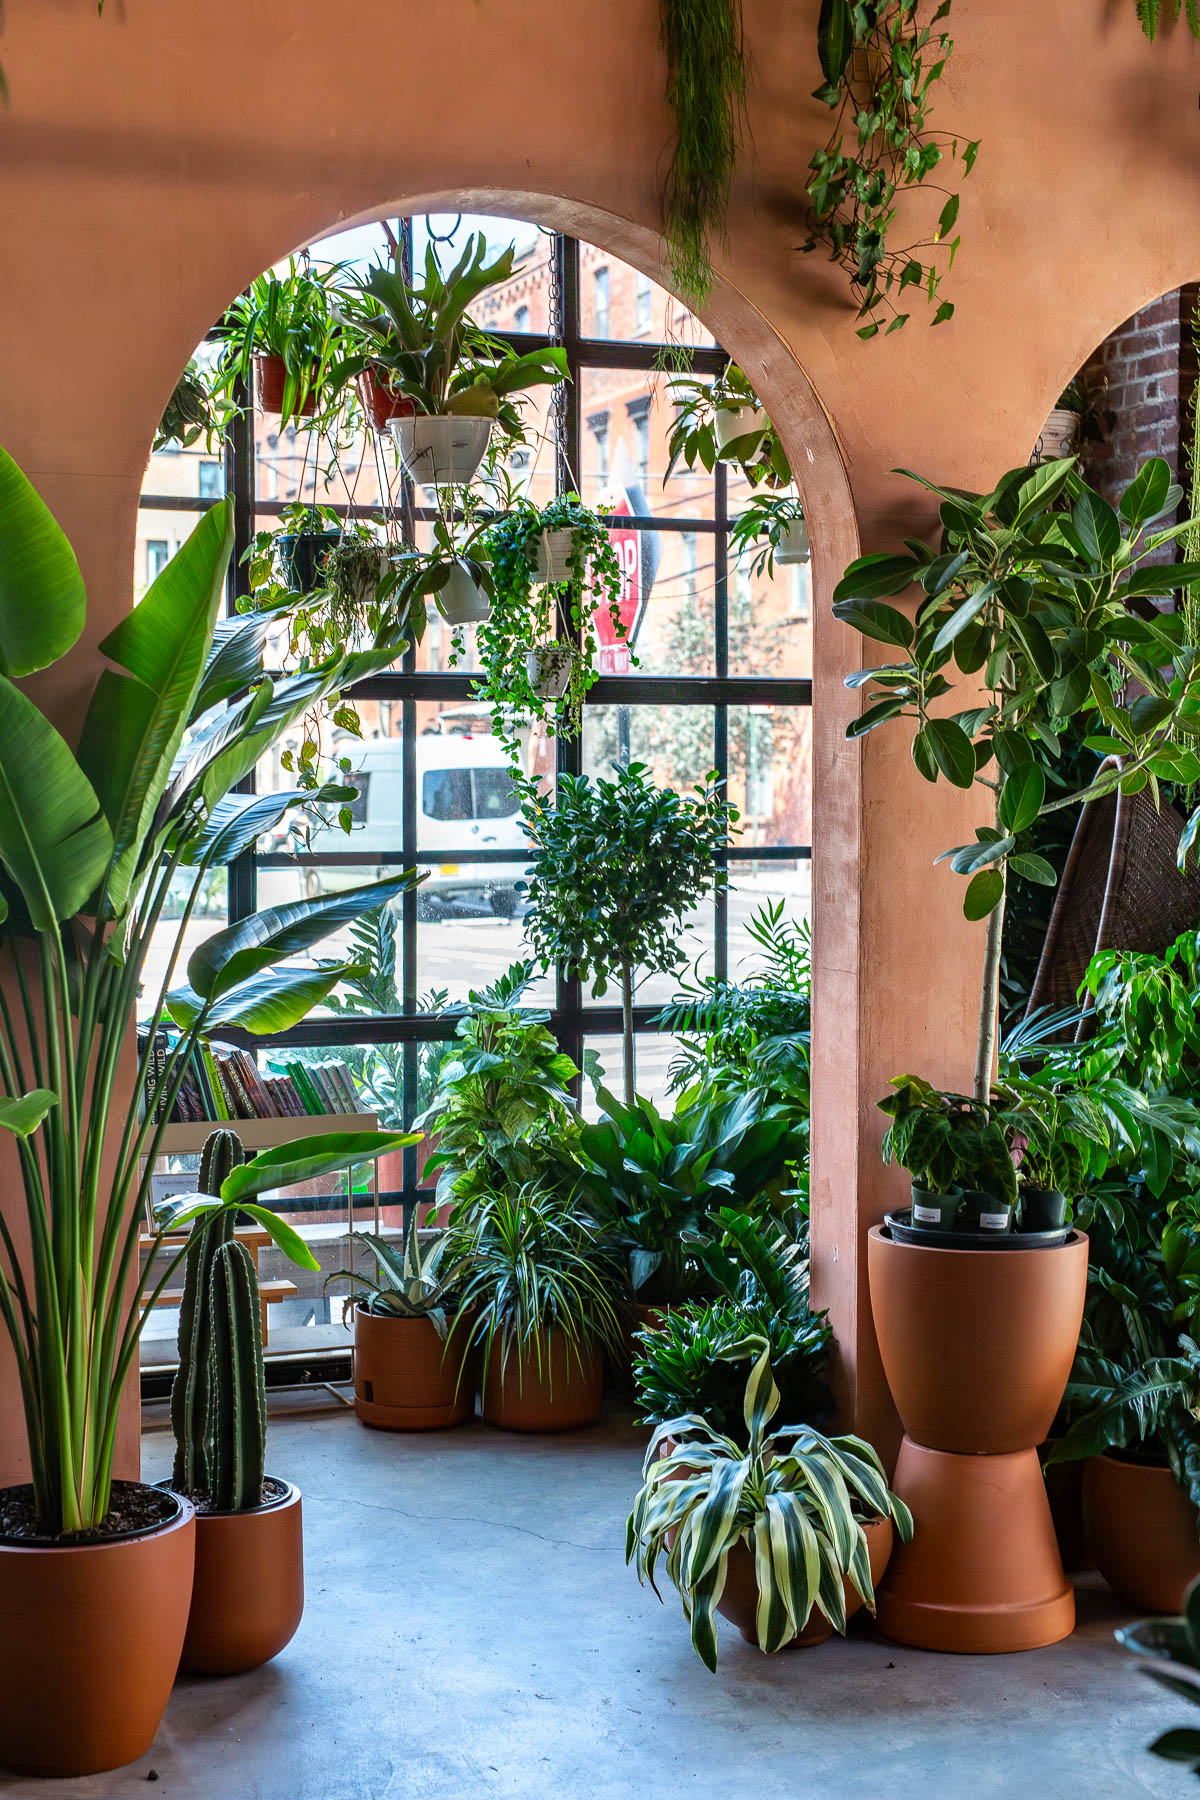 Greenery Unlimited in Greenpoint, Brooklyn, Best plant stores in NYC